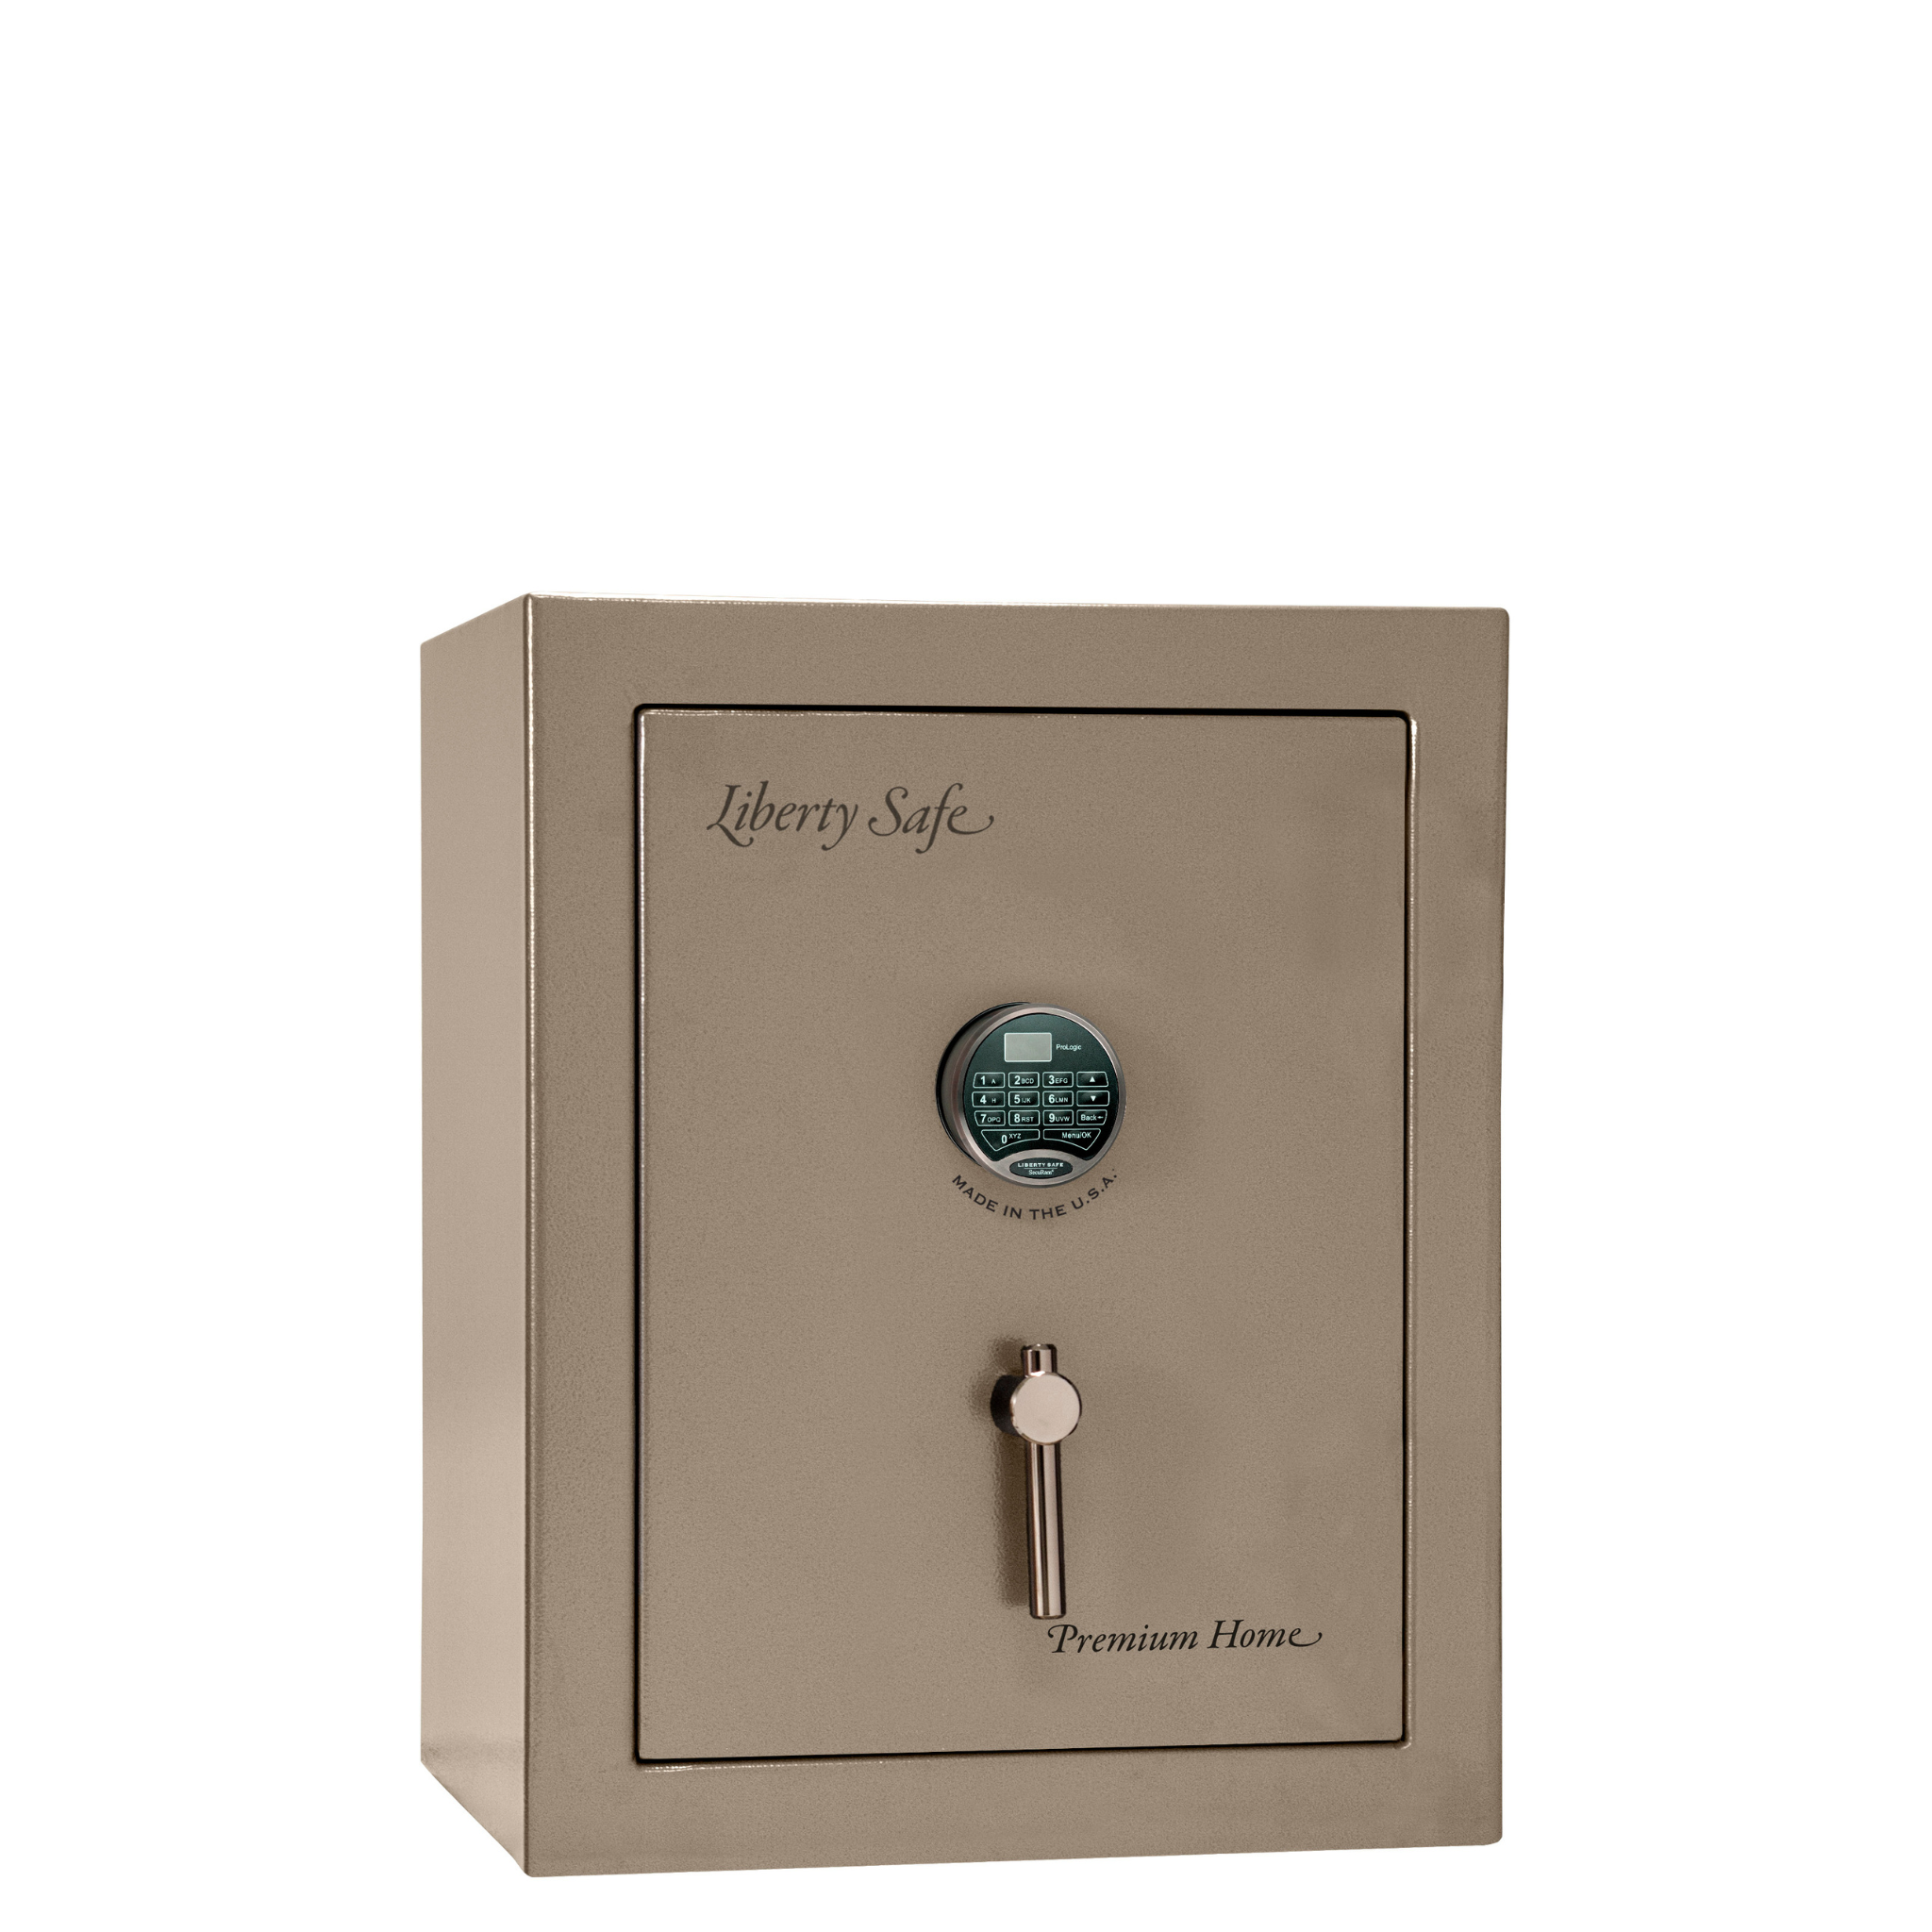 Premium Home Series | Level 7 Security | 2 Hour Fire Protection | 08 | Dimensions: 29.75"(H) x 24.5"(W) x 19"(D) | Champagne Marble - Closed Door